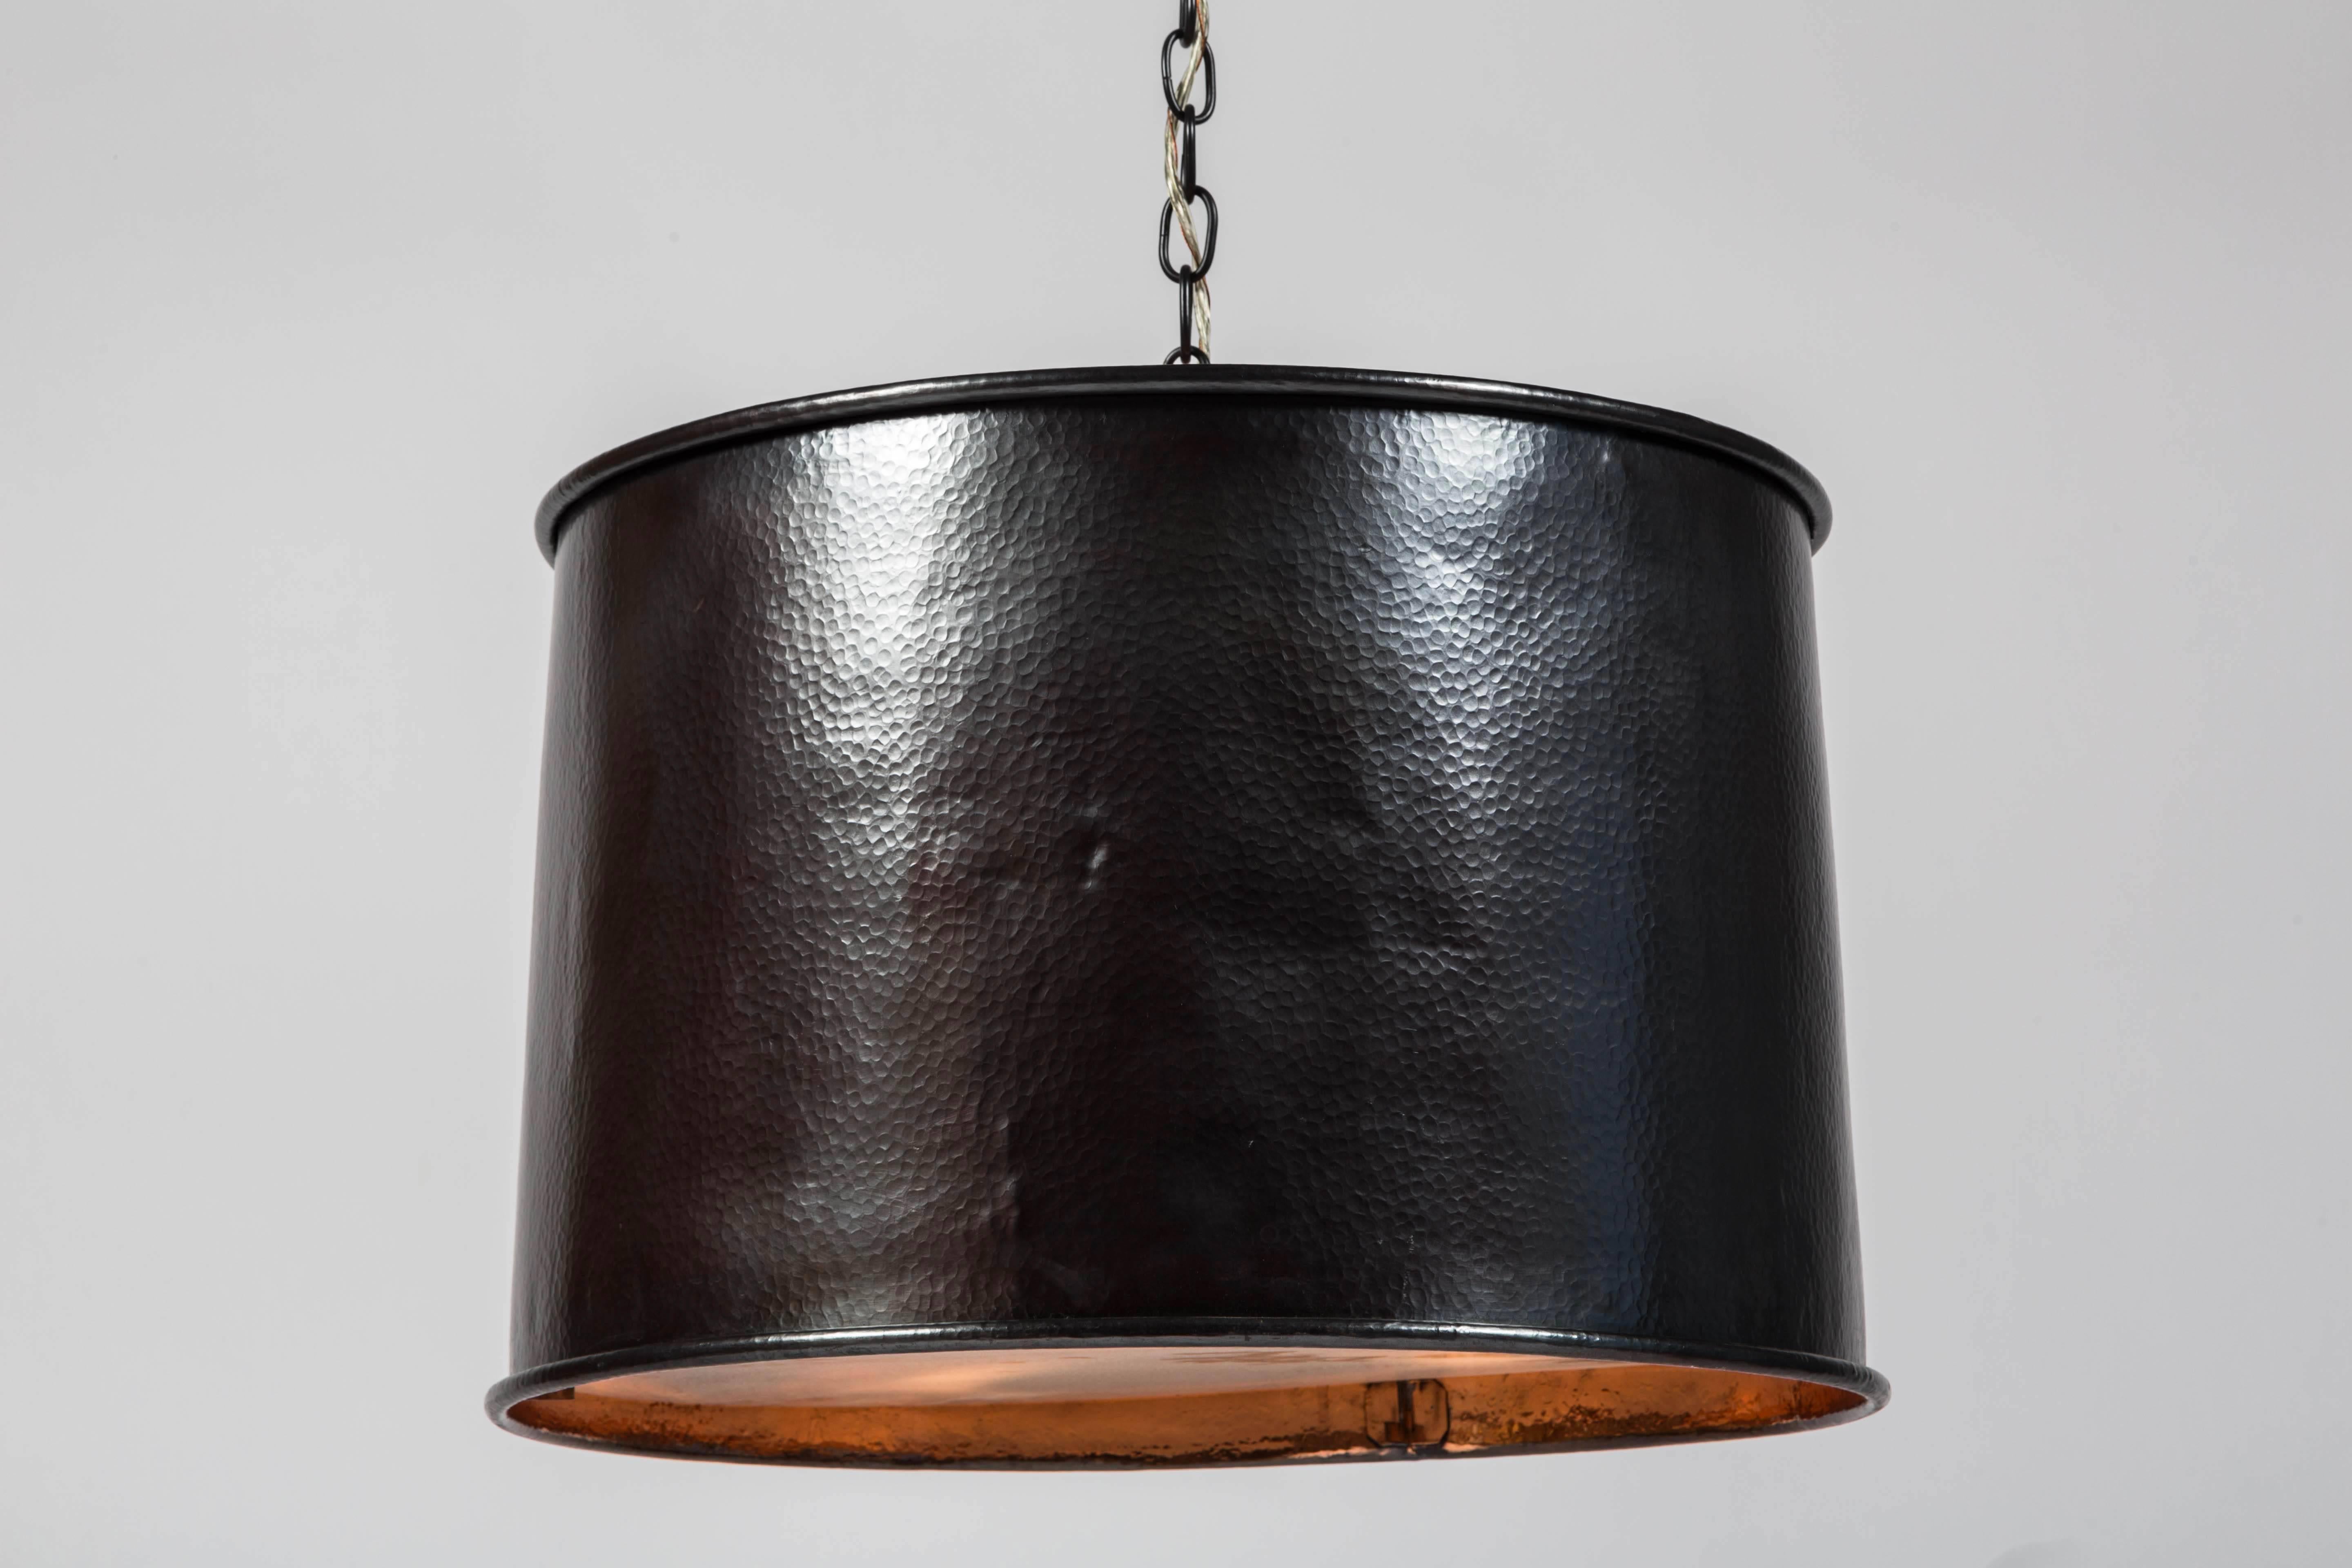 Contemporary copper drum light fixture. Wired for USA, four bulbs. Chain drop: 14.5